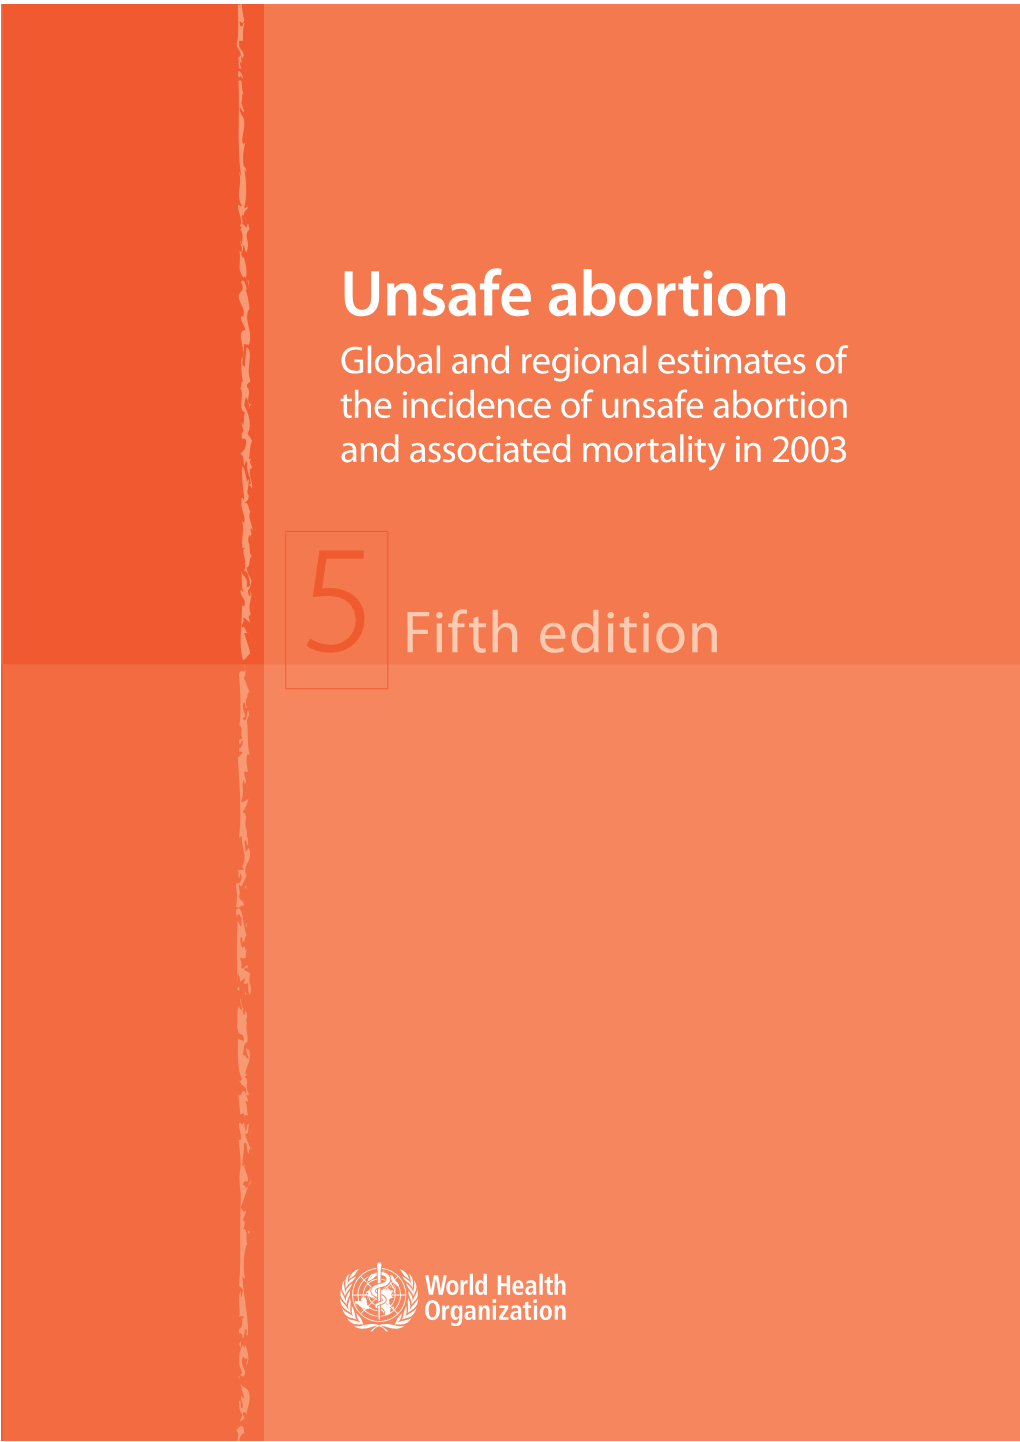 WHO- “Unsafe Abortion: Global and Regional Estimates of the Incidence